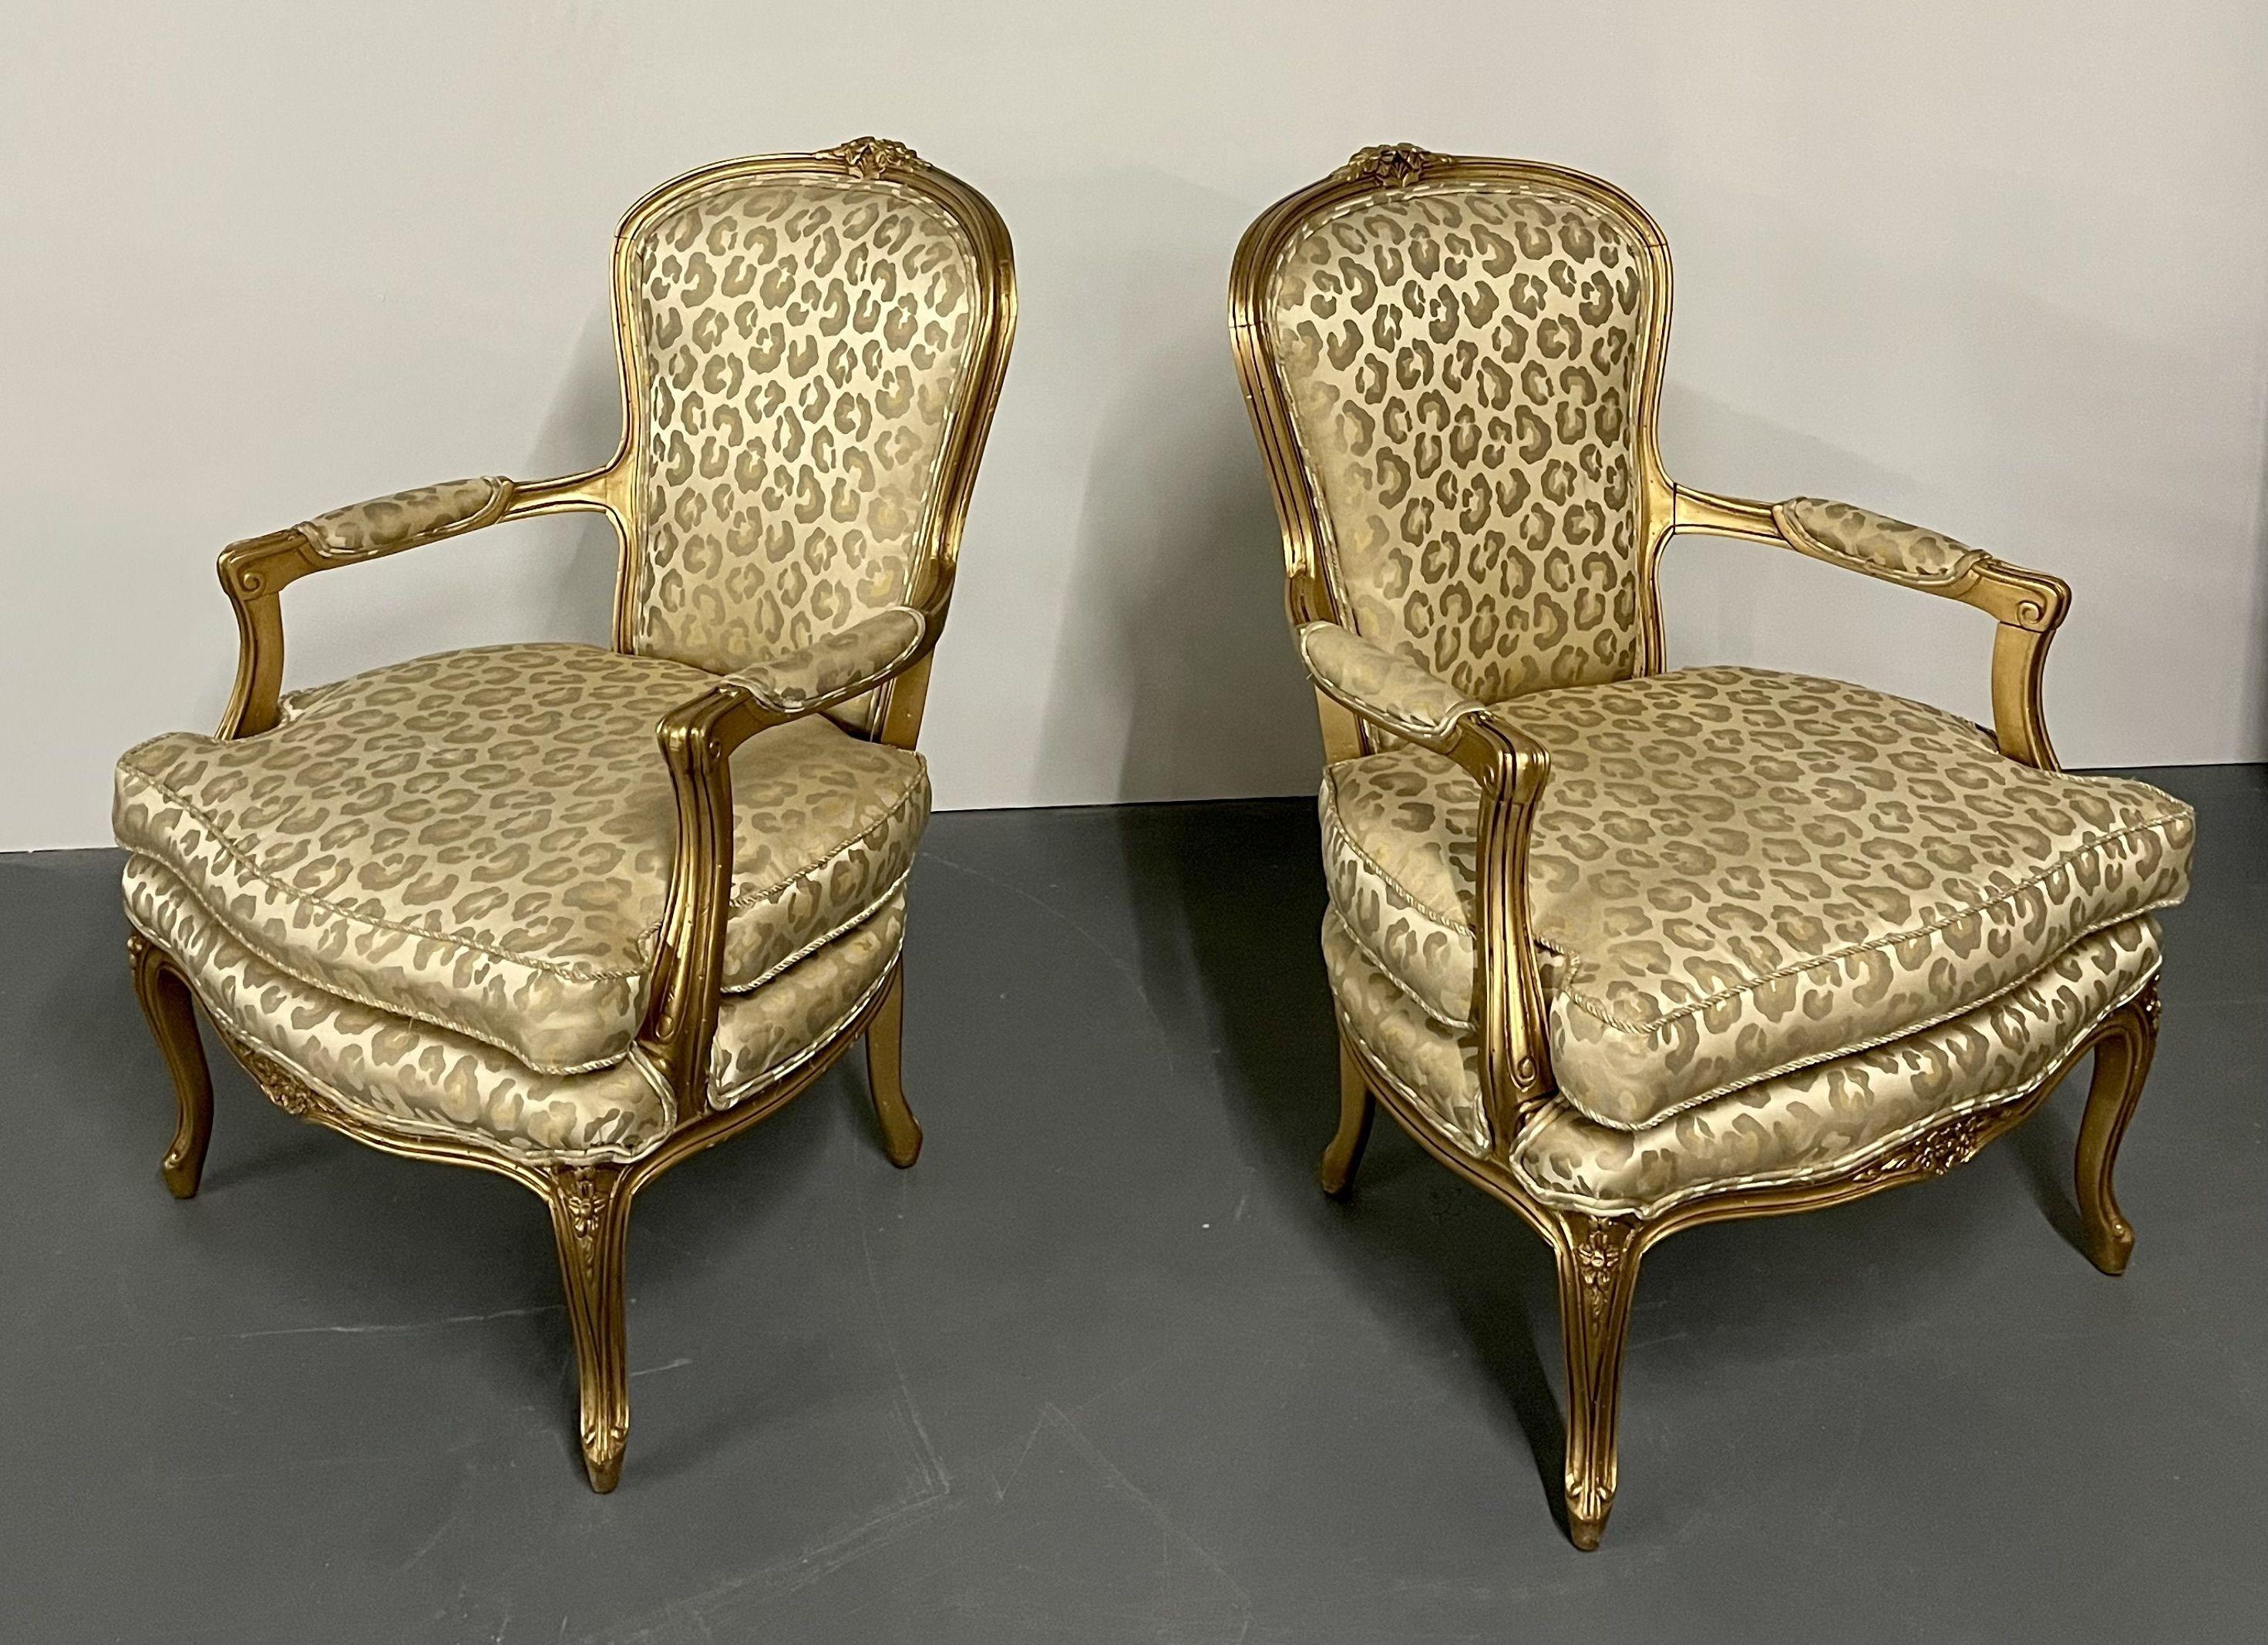 Pair Louis XV Fauteuil, gilt armchairs, Hollywood Regency, Leopard Textile

A finely carved and gilt wood pair of Arm chairs or Fauteuils. Each having a pillow top fully unholstered in a leopard upholstery. Dog, Drake, not included.

Measure: